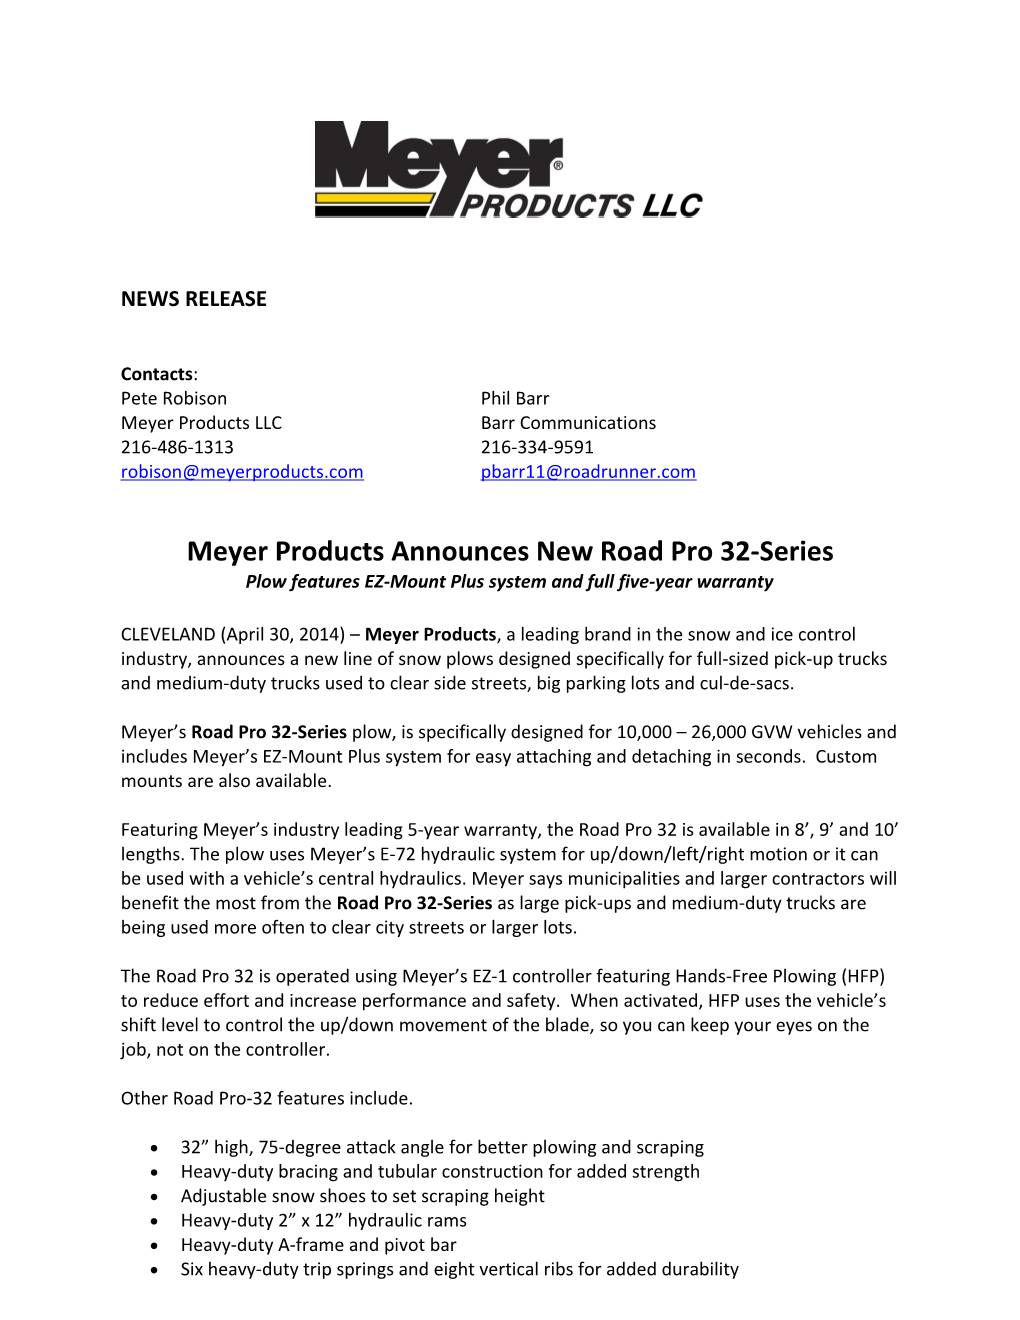 Meyer Products Announces New Road Pro 32-Series